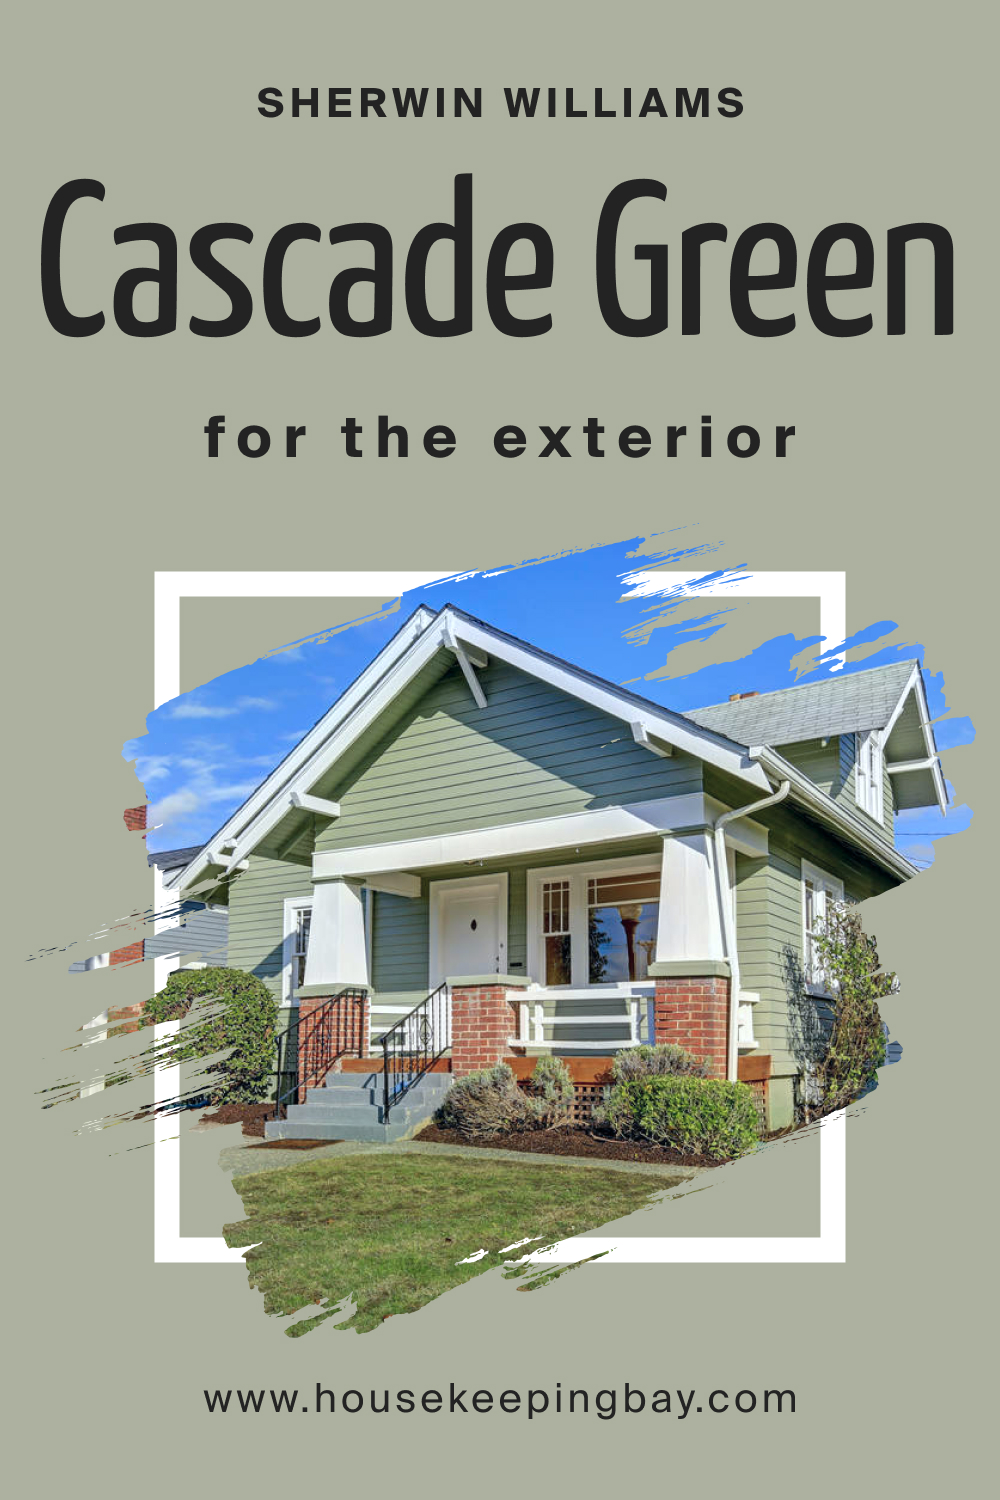 Sherwin Williams. SW 0066 Cascade Green For the exterior